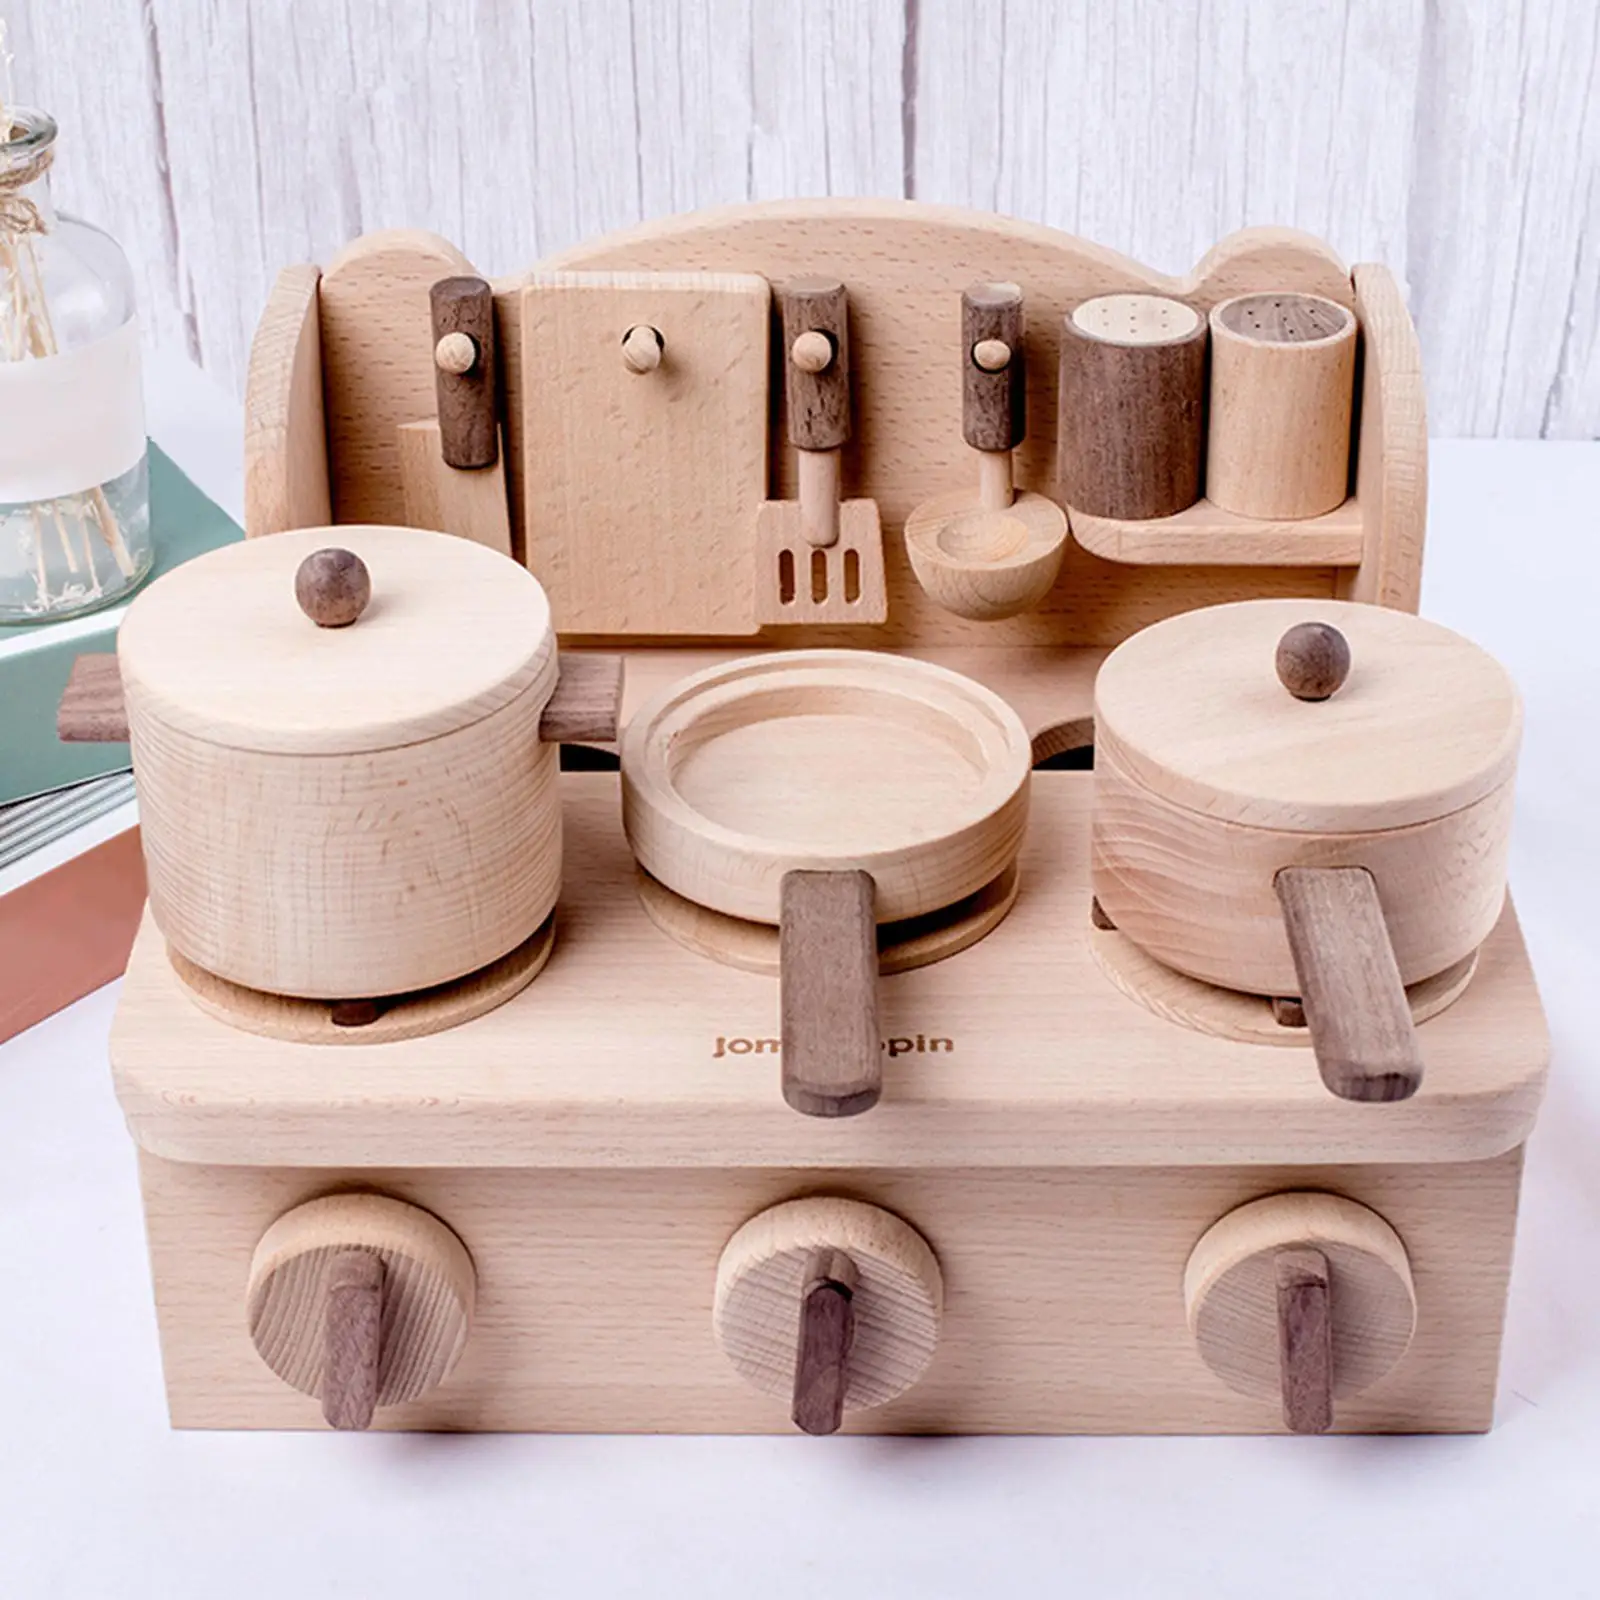 Wooden Pretend Kitchen Playset Realistic Setup Simulation Cooking Kitchen Play Toy Set for Ages 3+ Girls Boys Children Toddlers